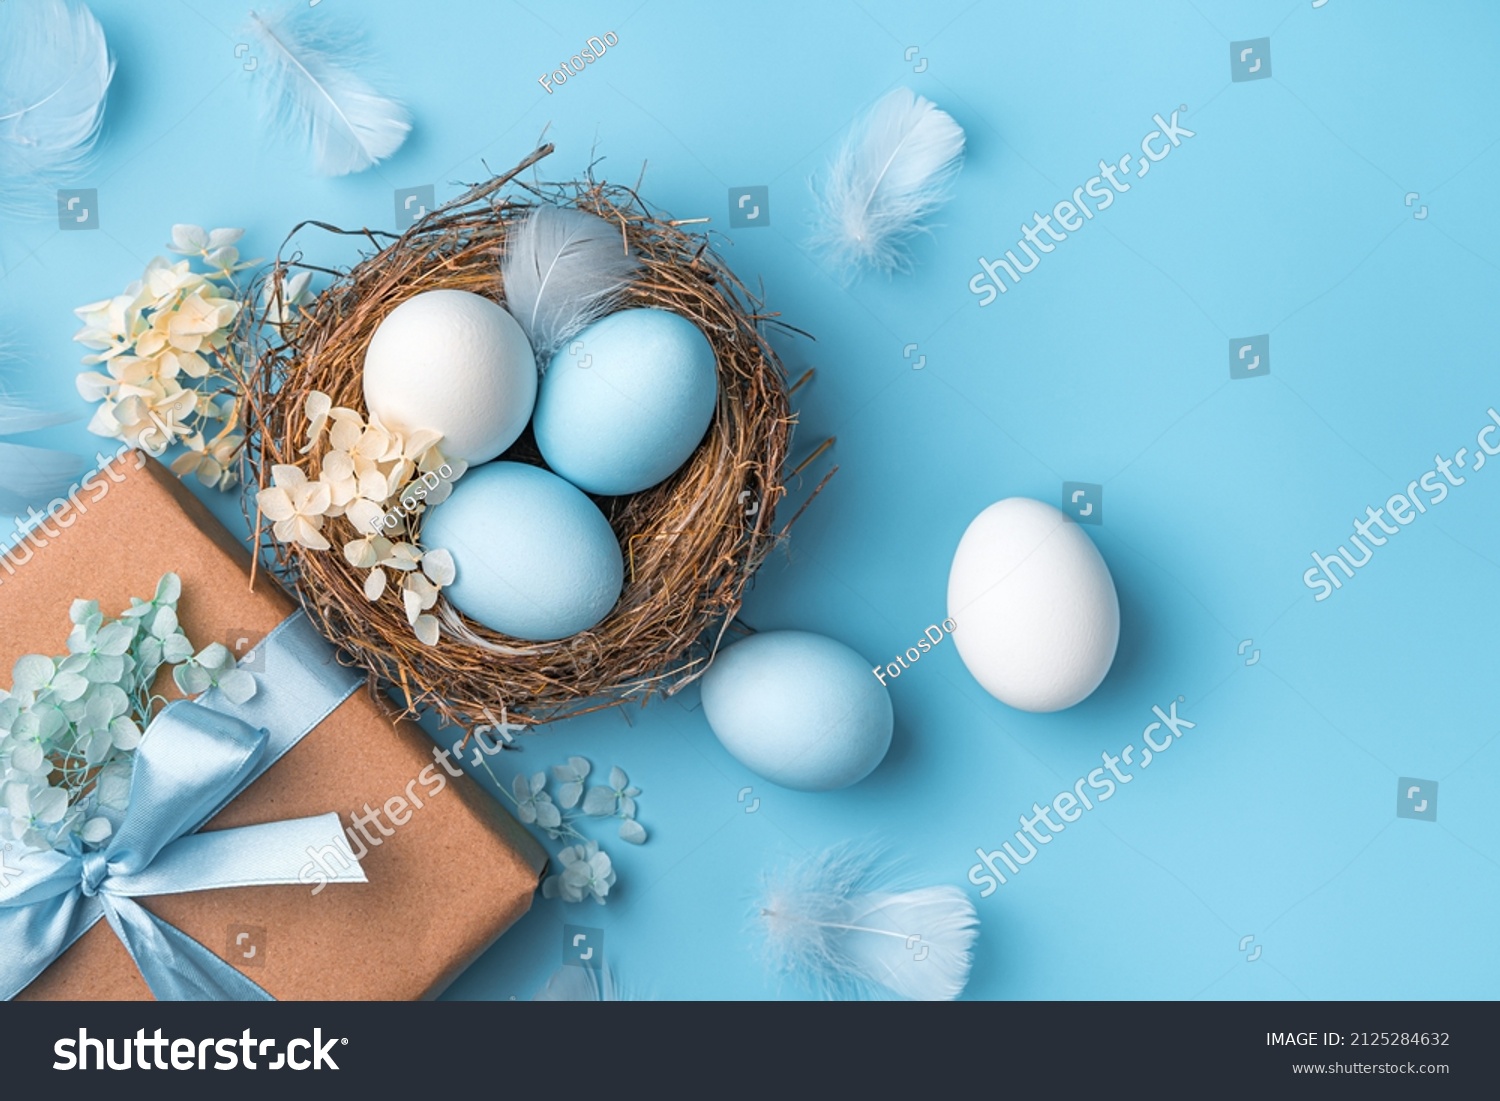 Easter pastel background with eggs, a nest and a gift on a blue background. The concept of a Happy Easter. Top view, copy space. #2125284632